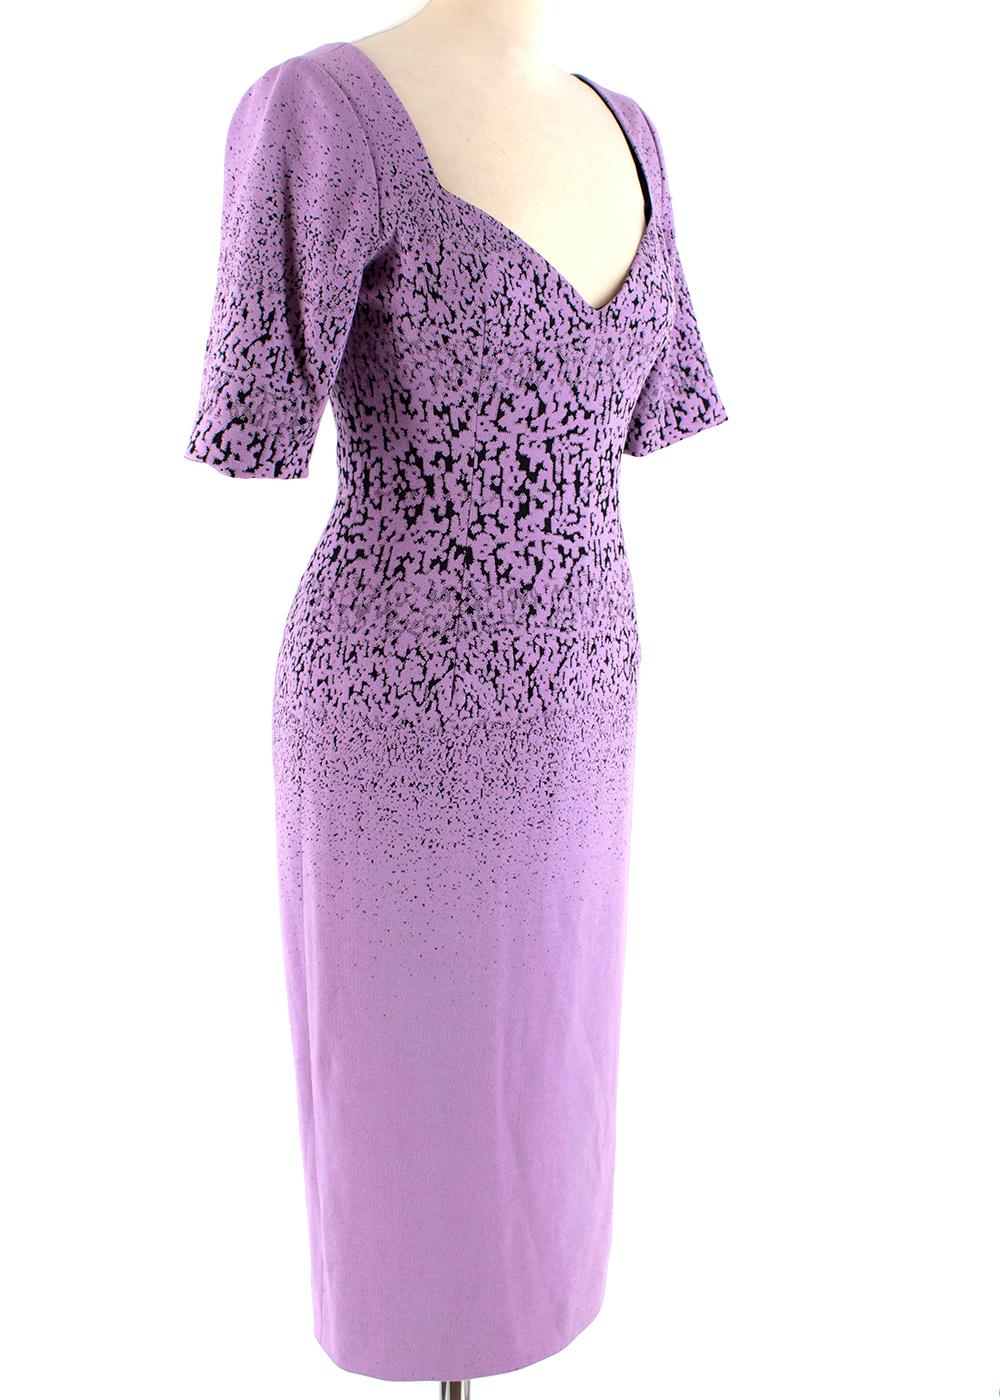 Prabal Gurung Lilac Speckled Fitted Midi Dress 

- Lilac speckled ombre design 
- Structured sweetheart neckline 
- V-shaped back 
- Midi sleeves and length
- Mid-weight stretchy material
- Back hem vent 
- Sculpting fitted style 
- Black silk blend